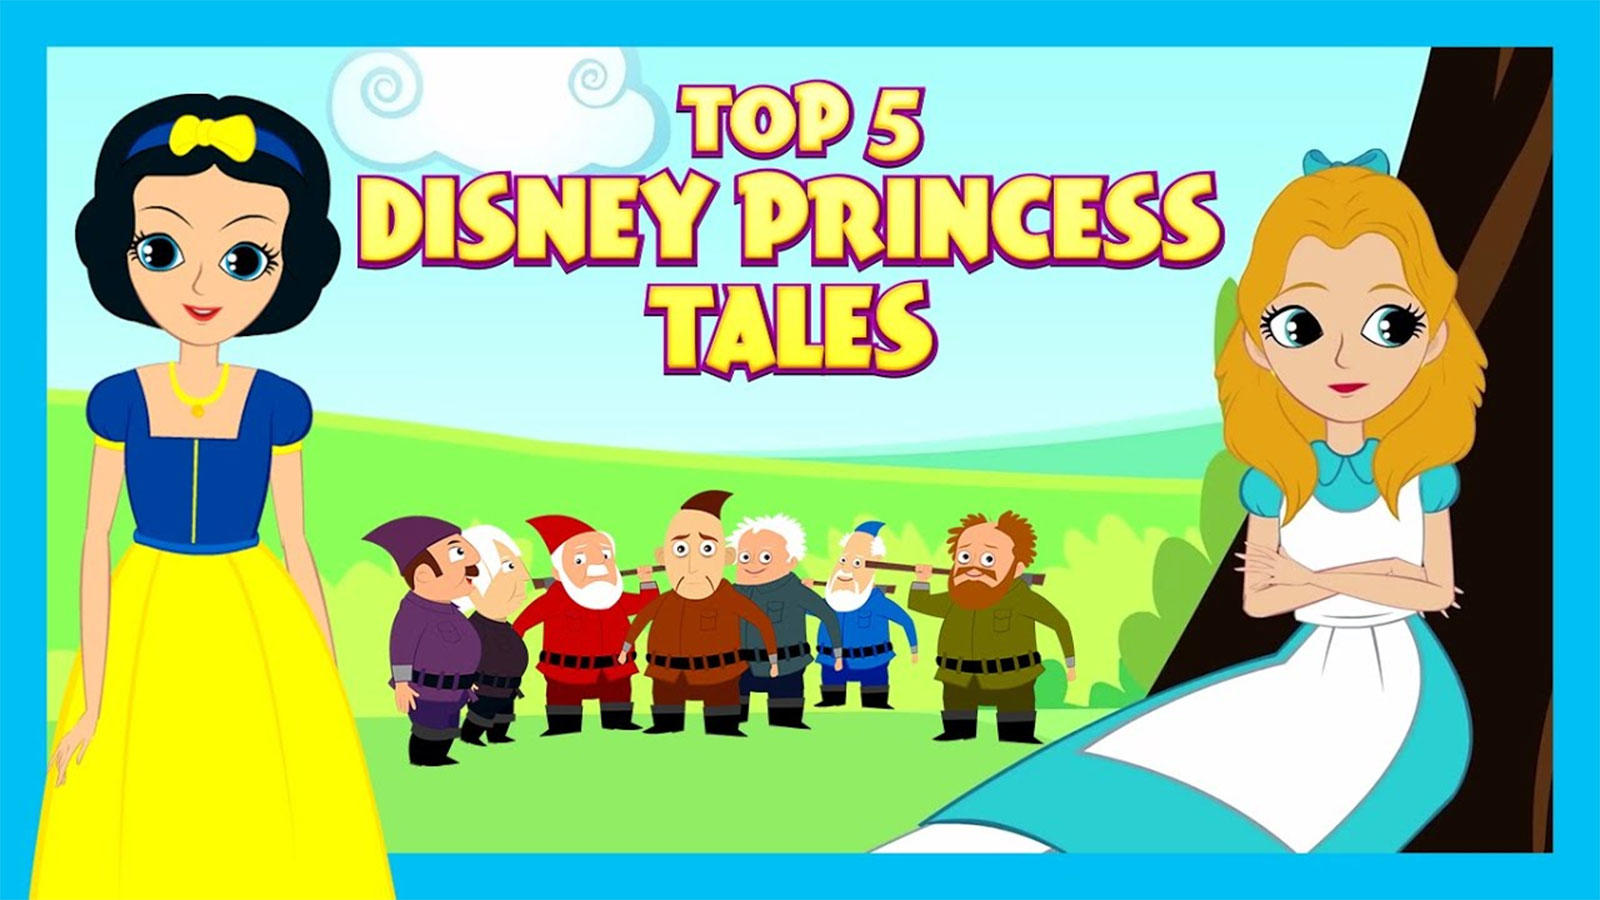 Popular Kids Songs and English Nursery Story 'Top 5 Disney Princess Tales'  for Kids - Check out Children's Nursery Rhymes, Baby Songs, Fairy Tales In  English | Entertainment - Times of India Videos